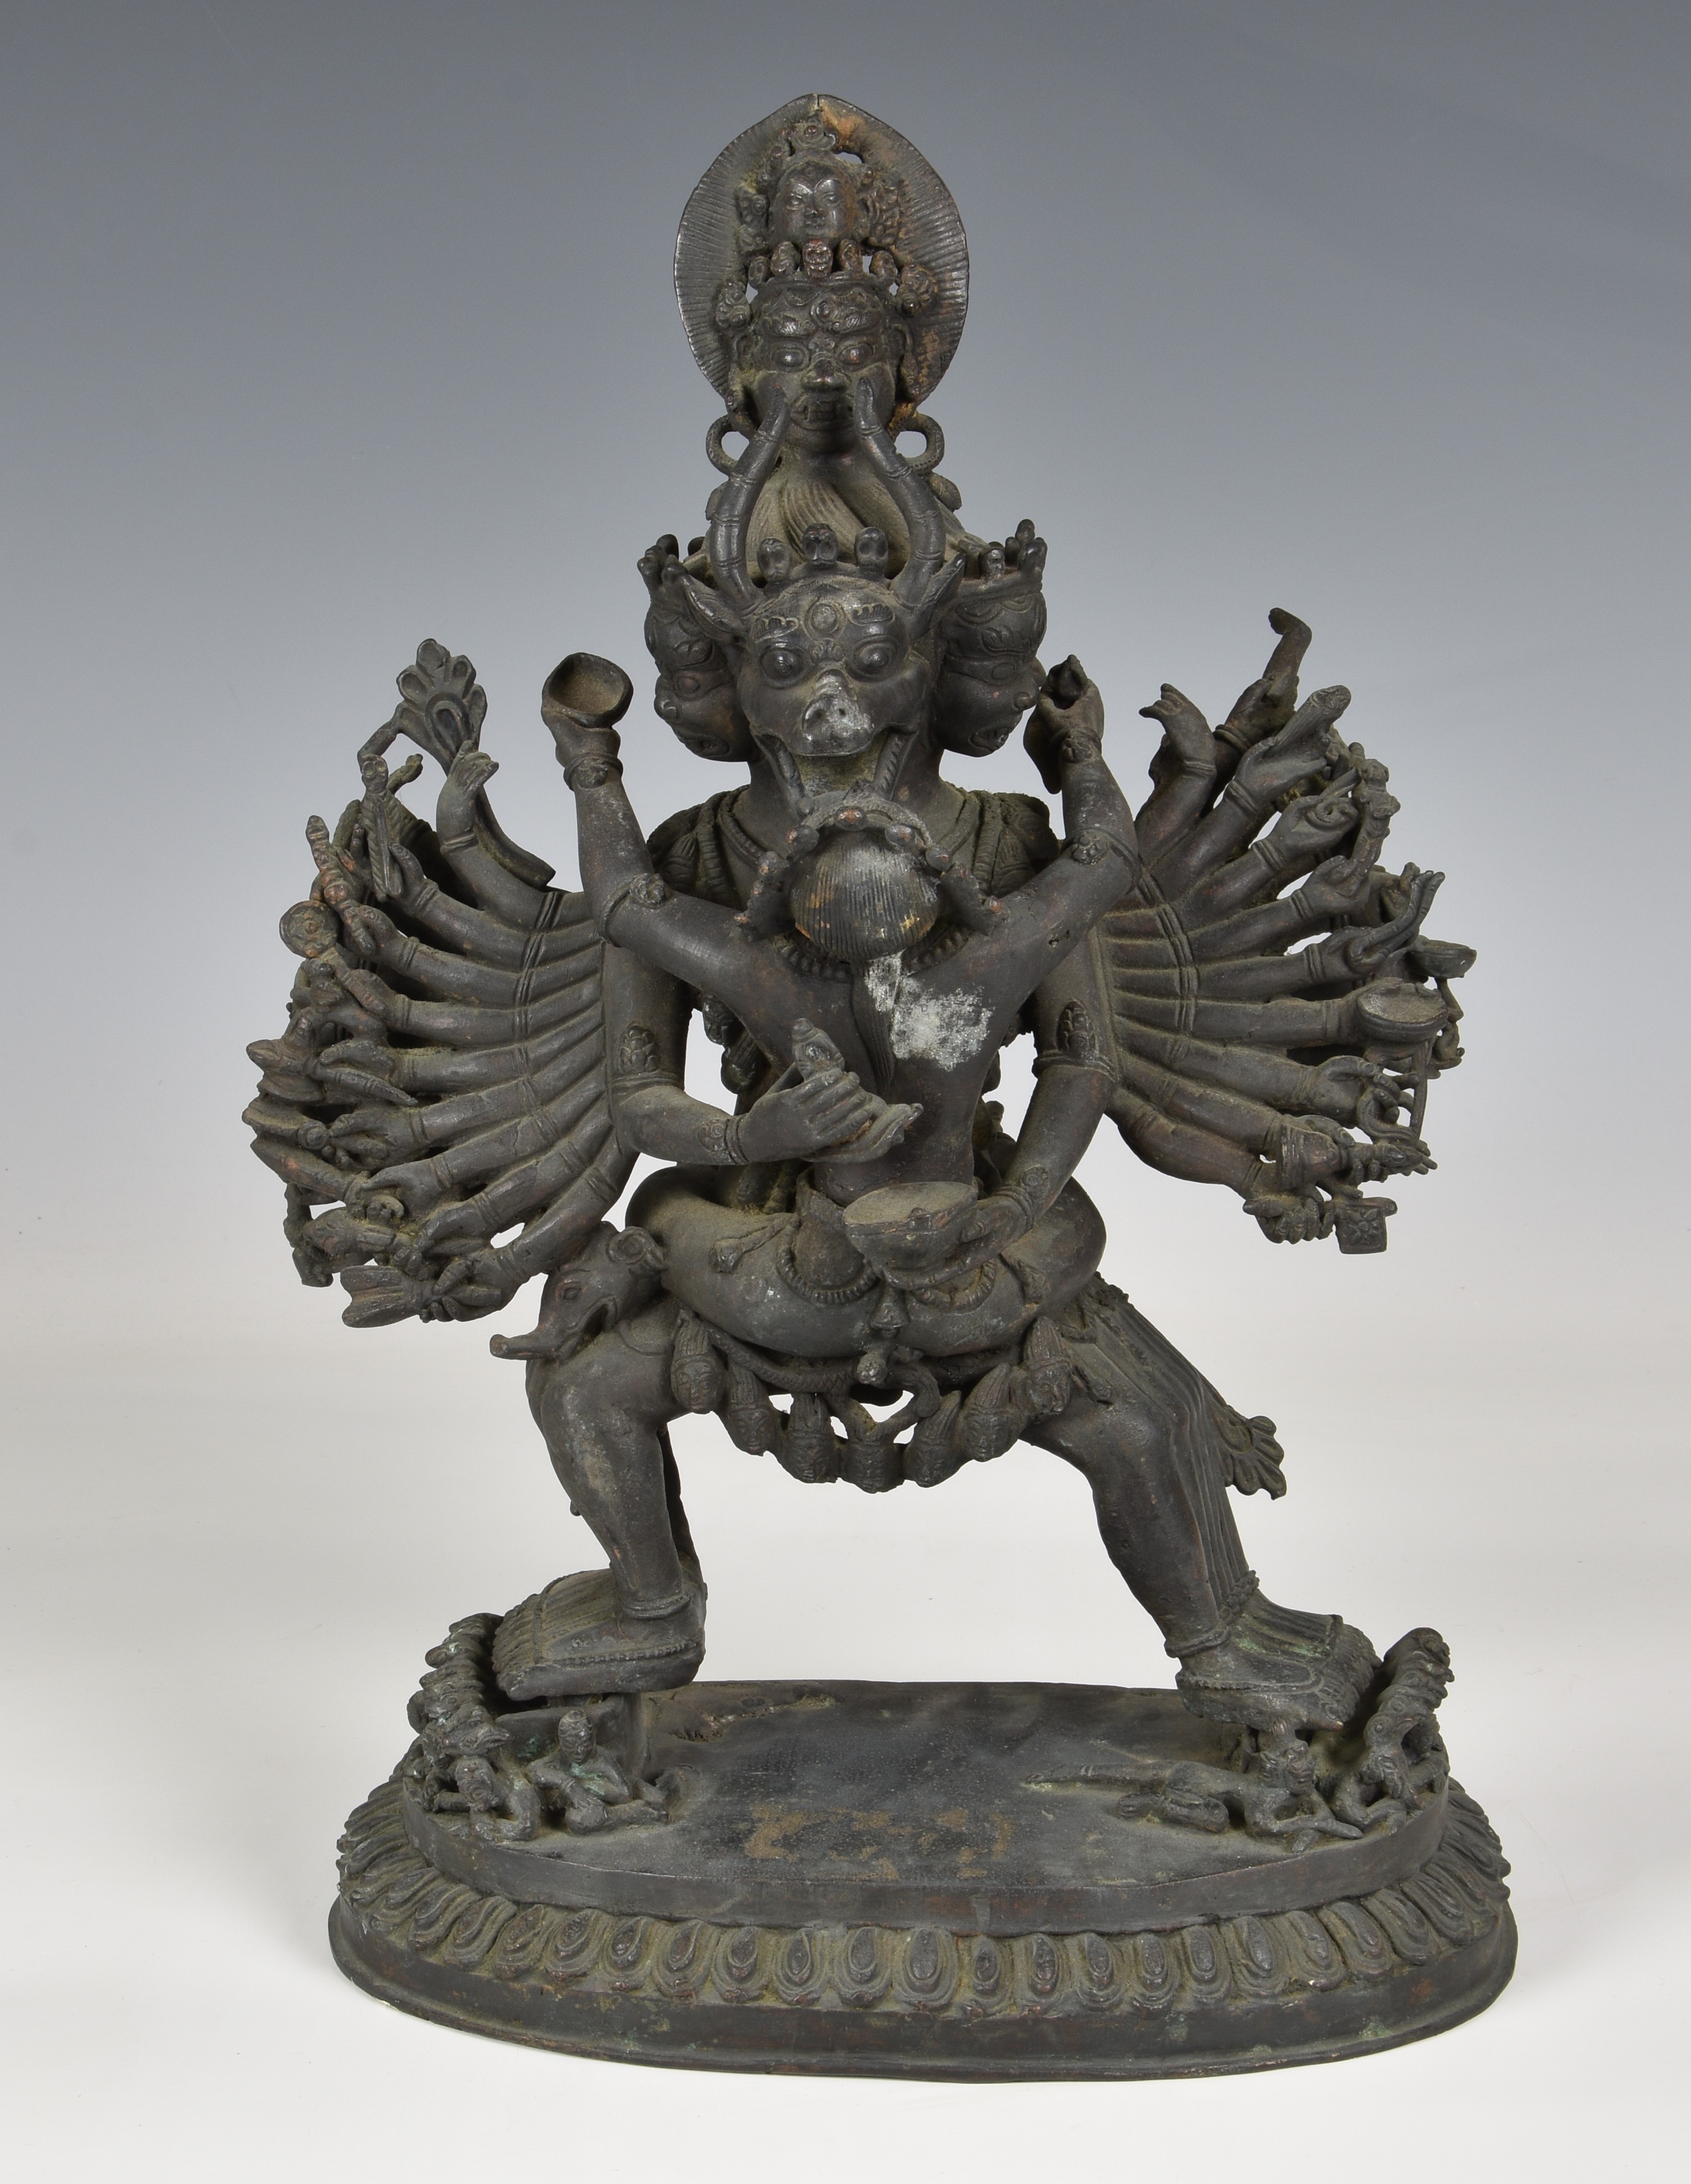 A Chinese patinated bronze figure of Kapaladhara Hevajra, 20th century, the deity depicted with